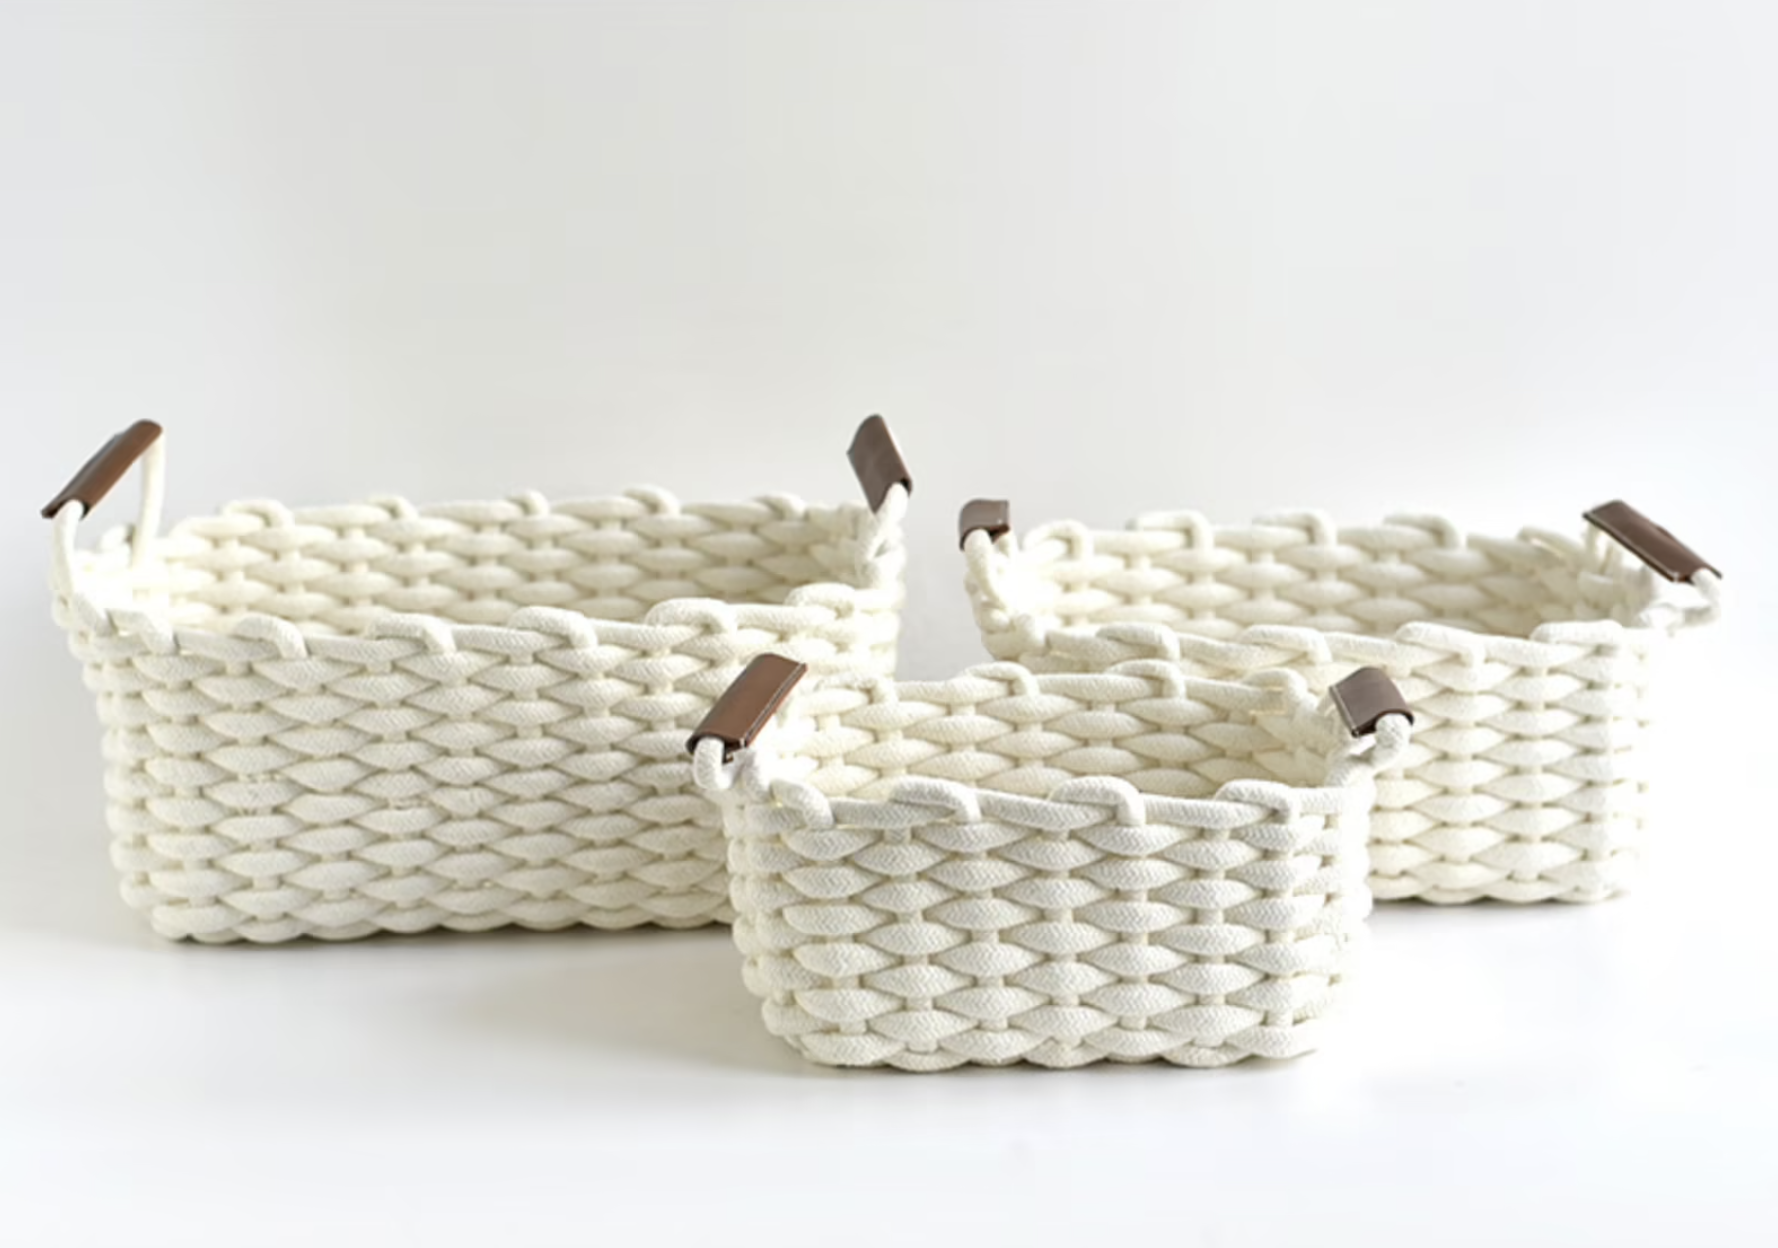 Three rectangular white cotton woven baskets with brown handles